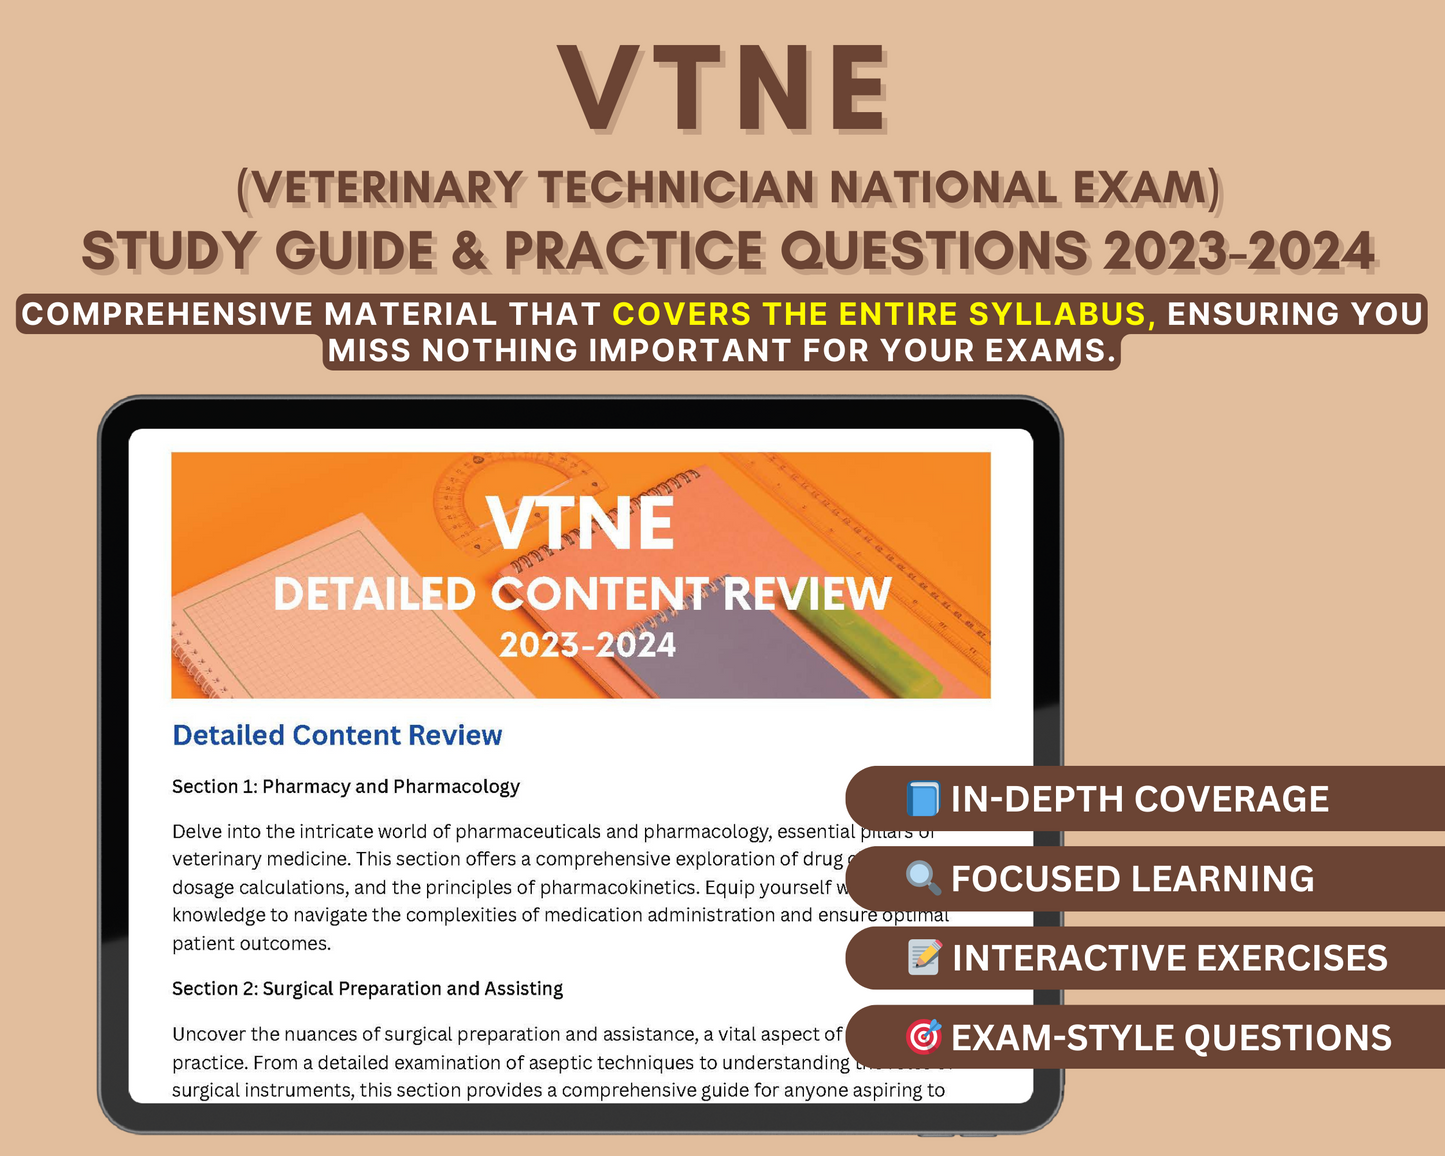 VTNE Exam Study Guide 2023-2024: In-Depth Content Review, and Practice Tests for Veterinary Technician National Exam